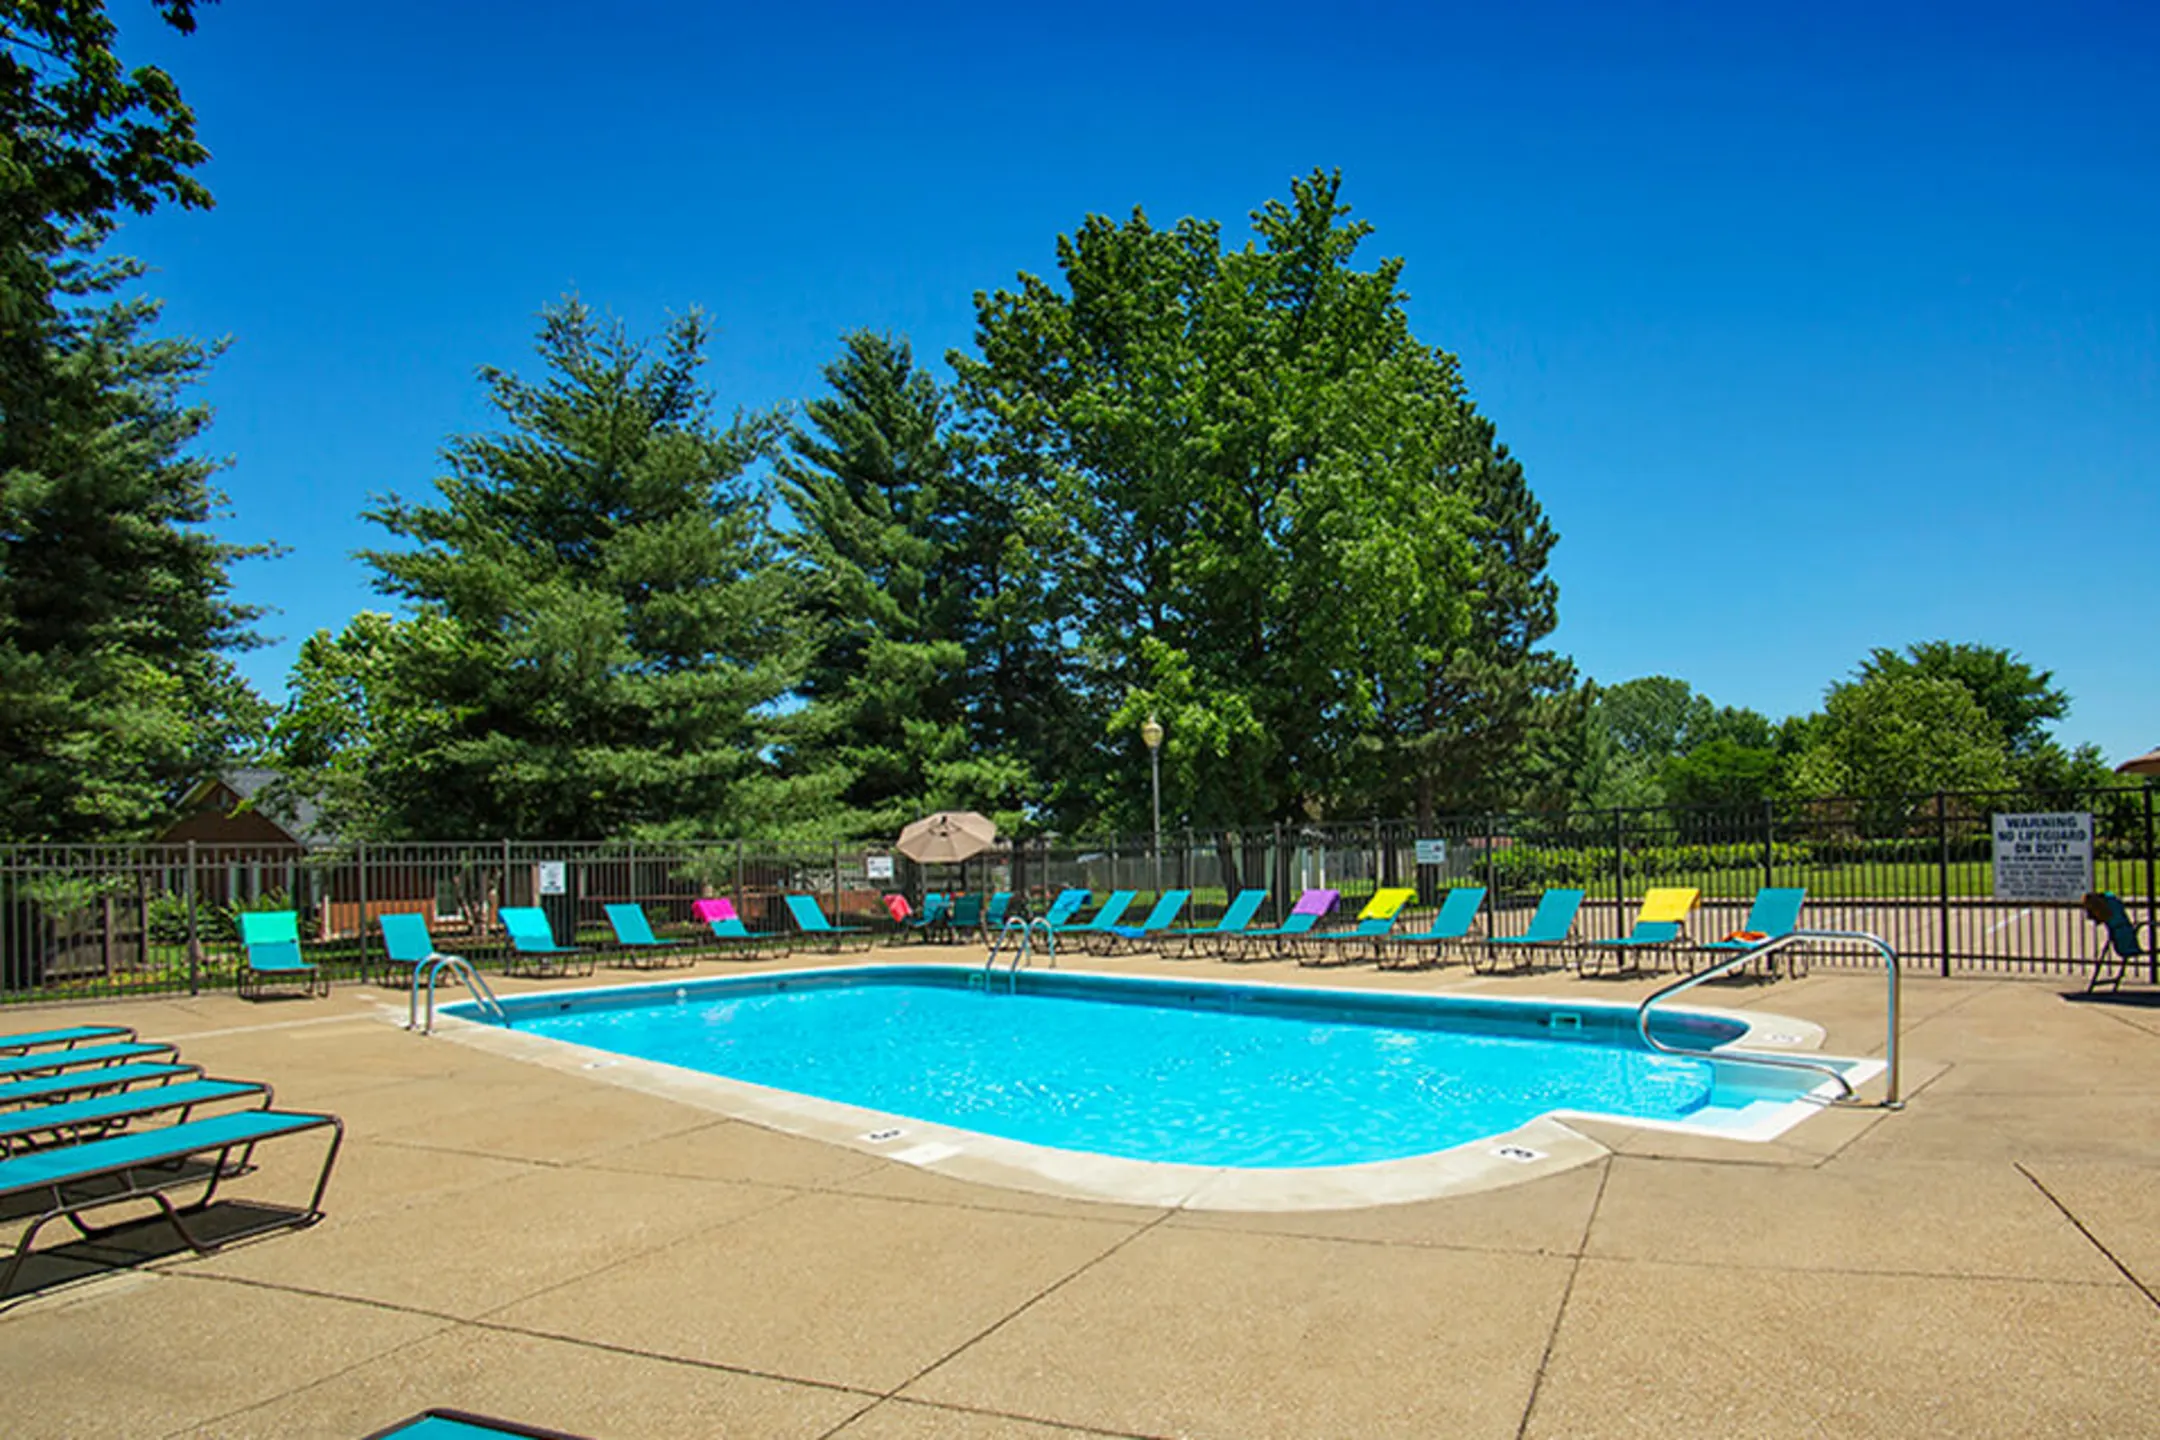 Pool - Indian Woods Apartments of Evansville - Evansville, IN